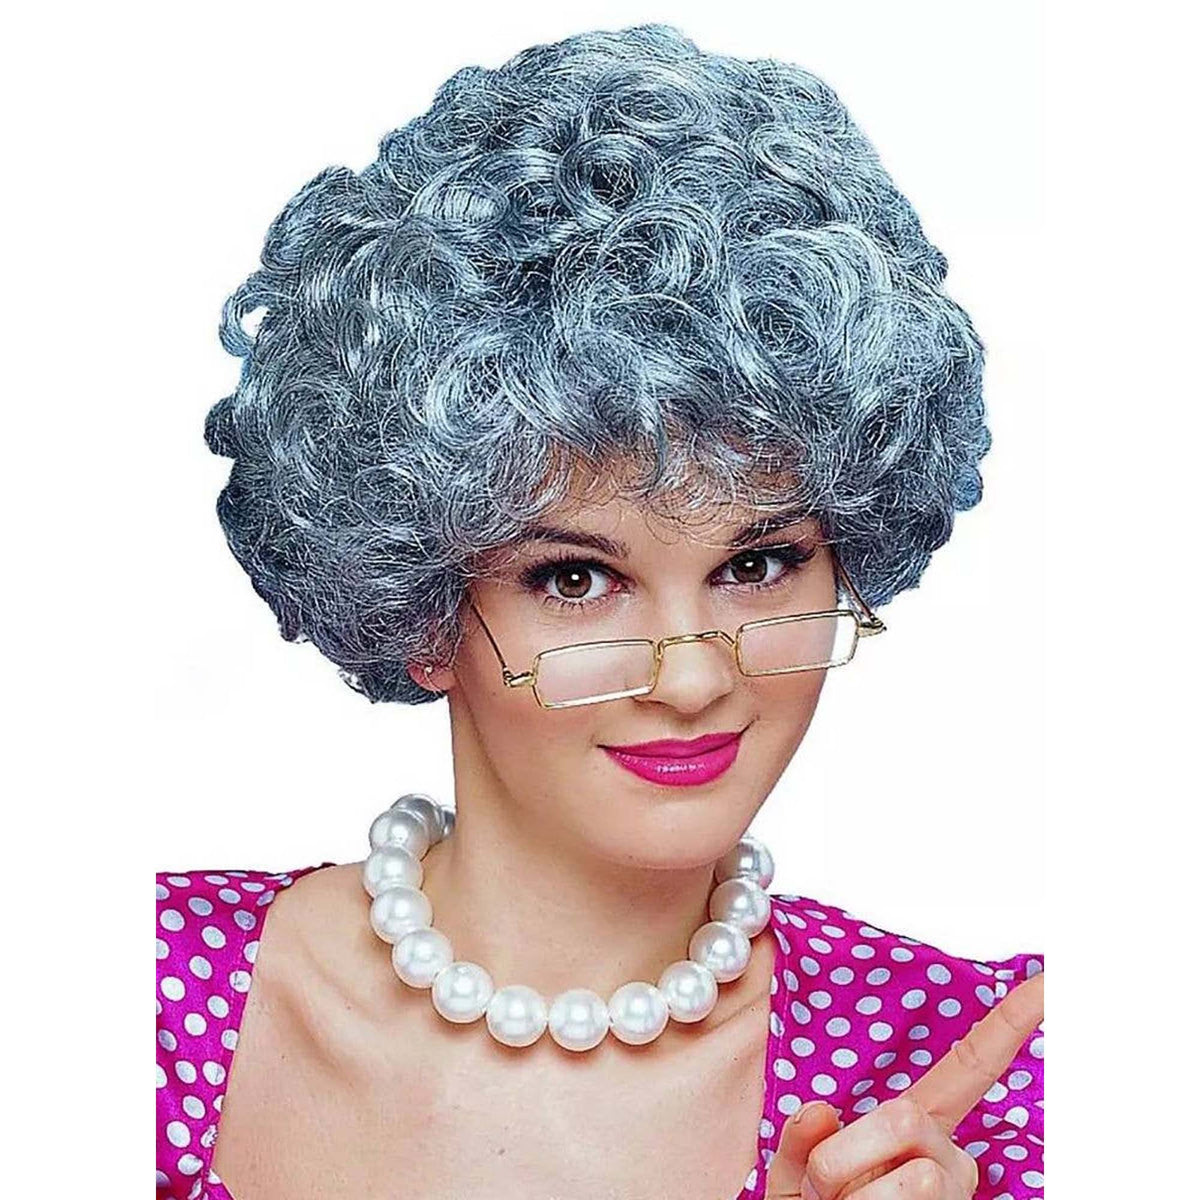 COSTUME CULTURE BY FRANCO Costume Accessories Granny Deluxe Grey Wig for Adults